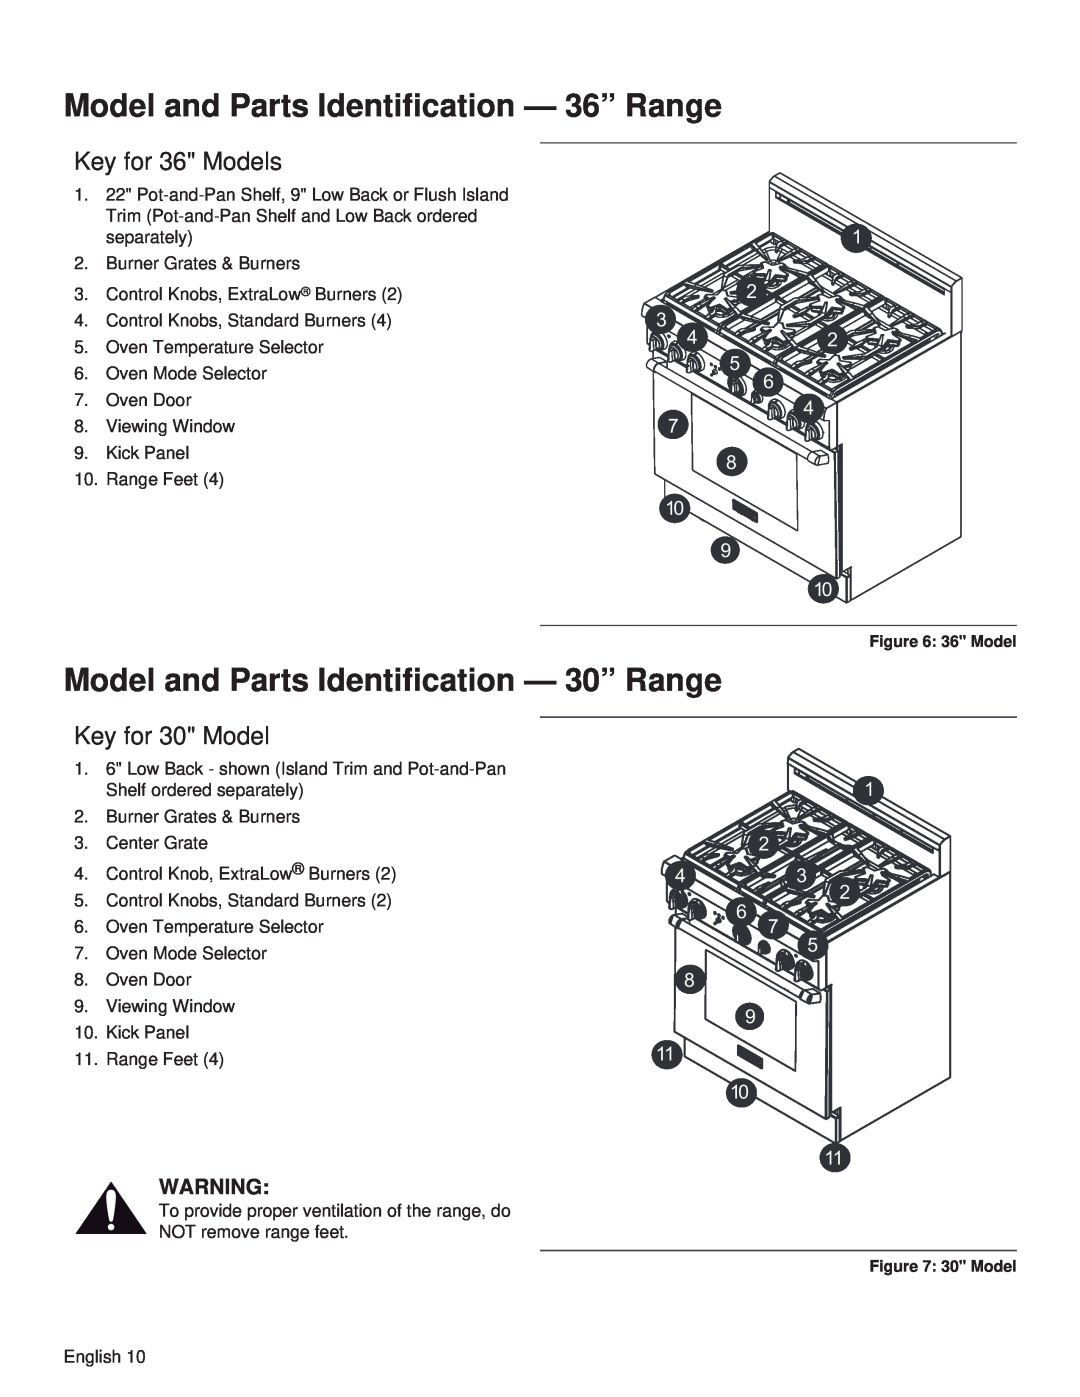 Thermador PRL36 Model and Parts Identification - 36” Range, Model and Parts Identification - 30” Range, Key for 36 Models 